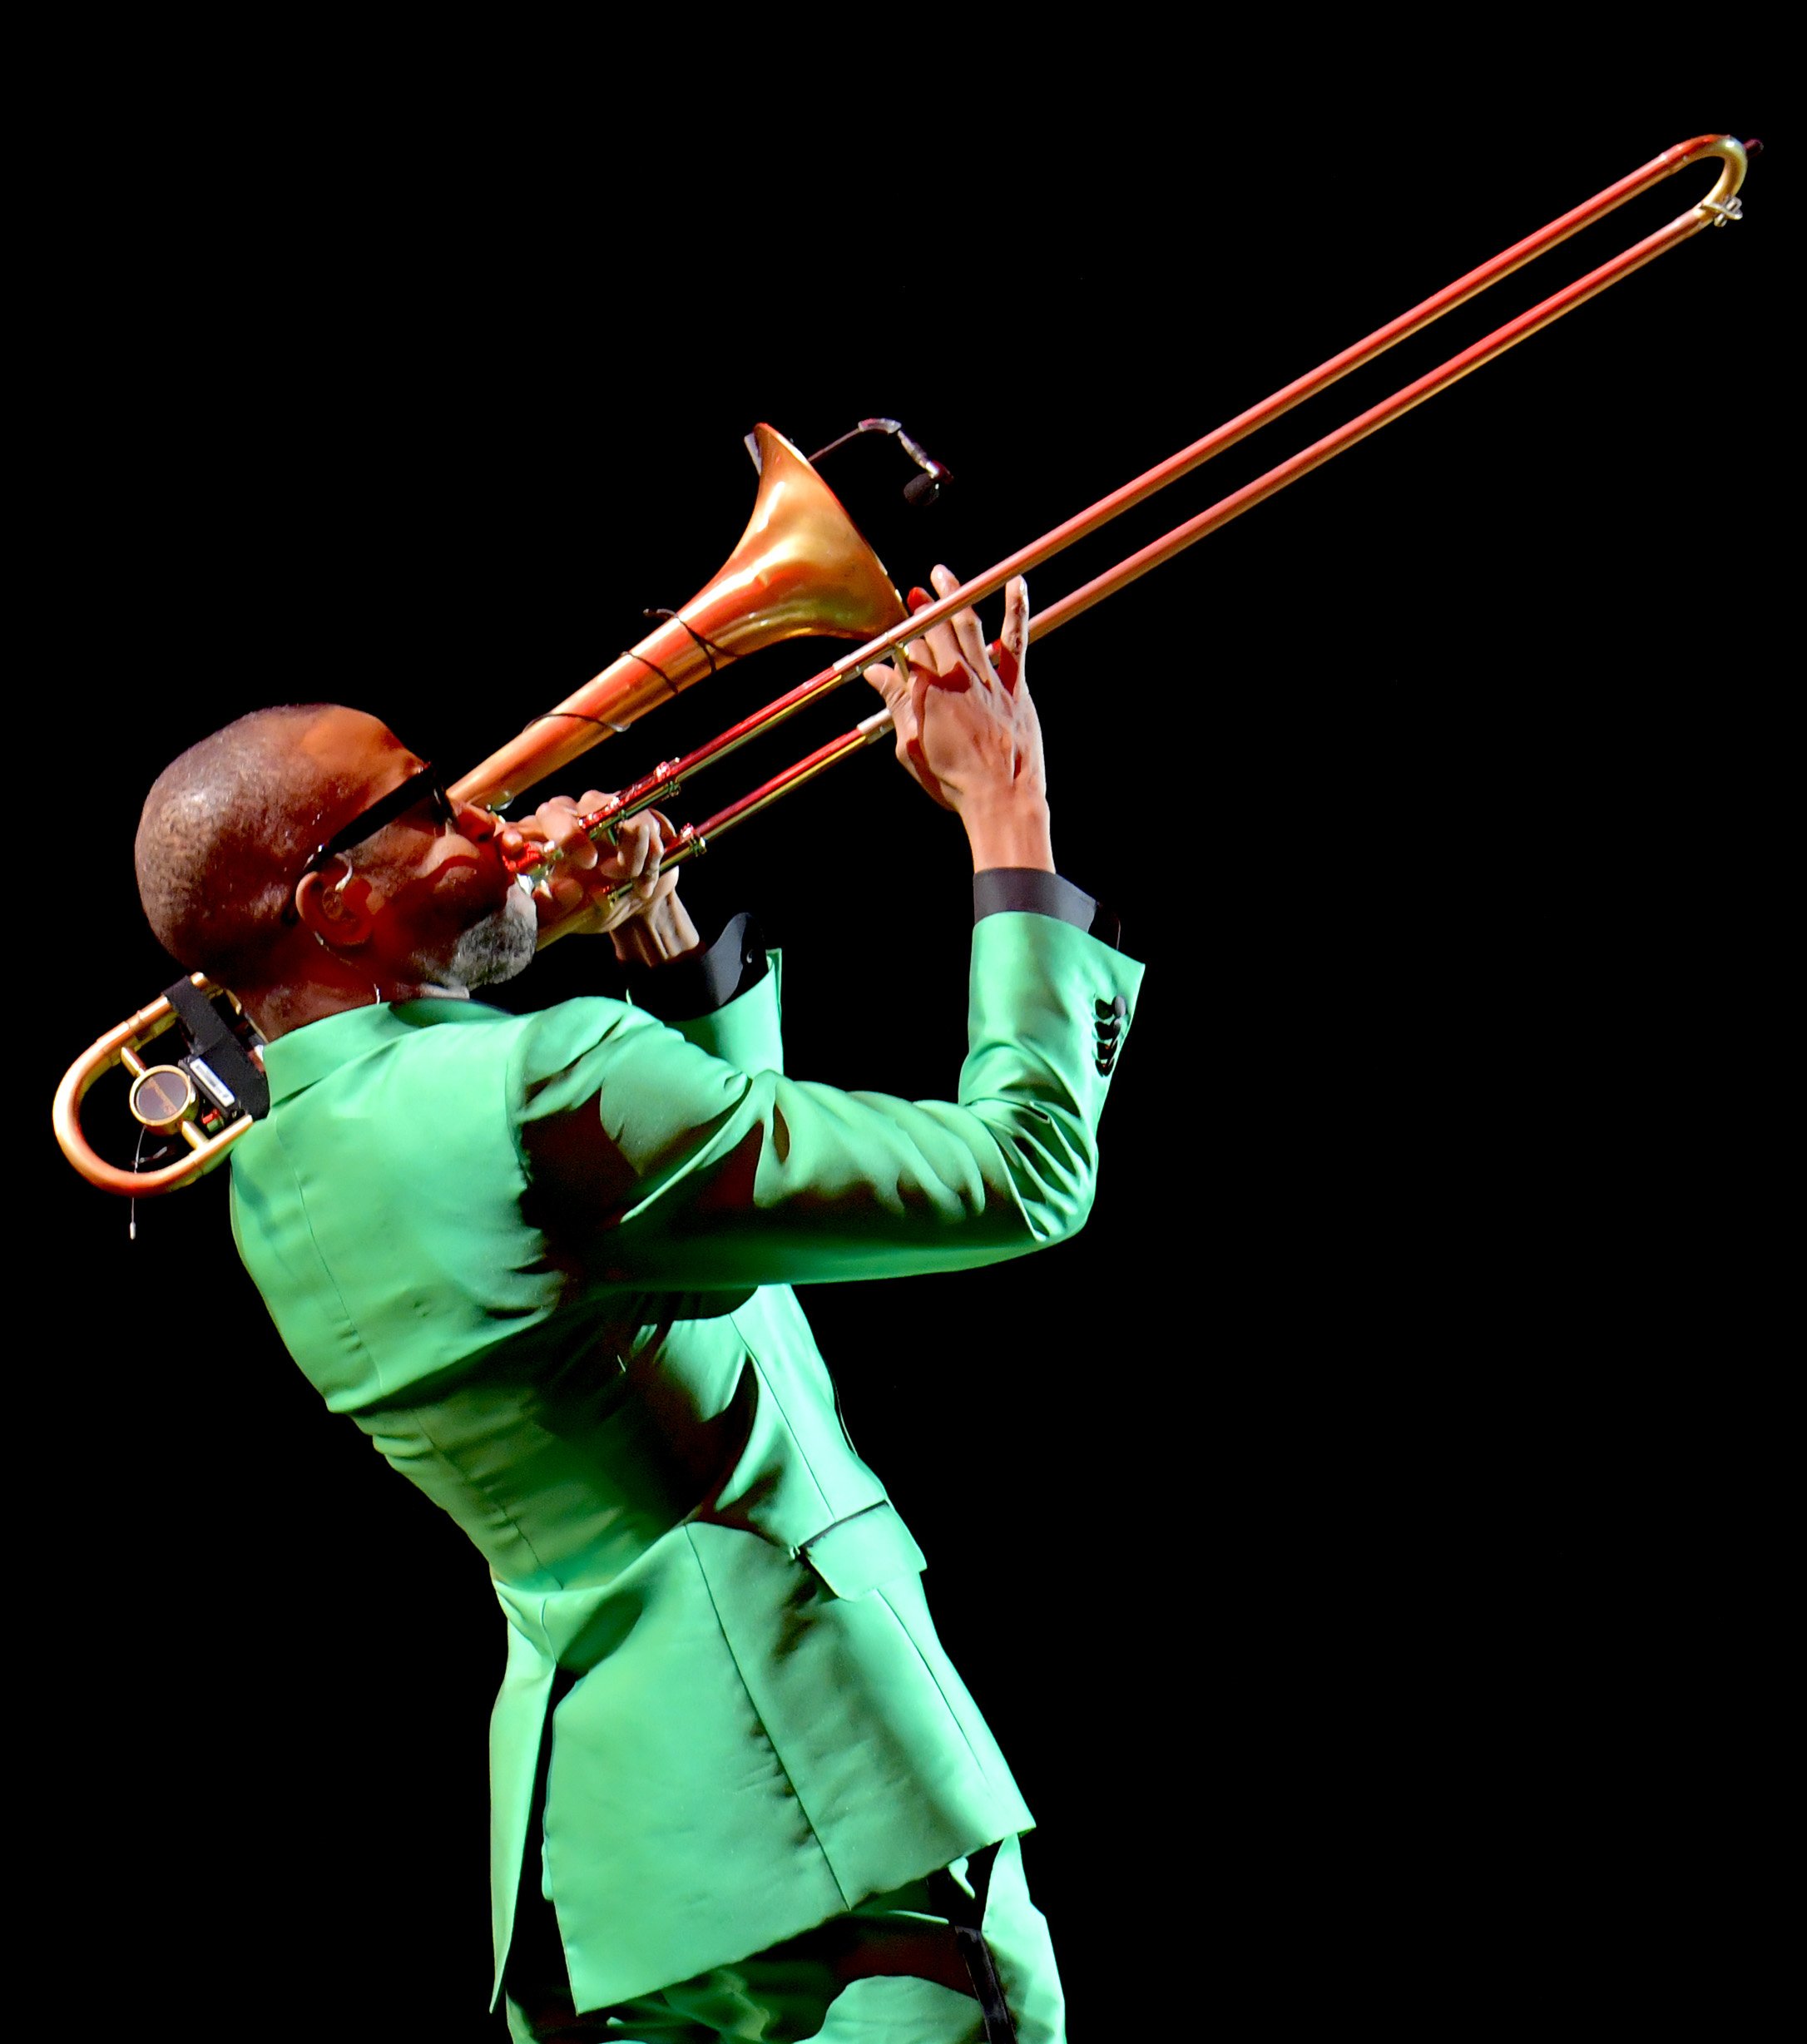  LOS ANGELES, CALIFORNIA - FEBRUARY 03: Trombone Shorty performs onstage during MusiCares Persons of the Year Honoring Berry Gordy and Smokey Robinson at Los Angeles Convention Center on February 03, 2023 in Los Angeles, California. (Photo by Lester 